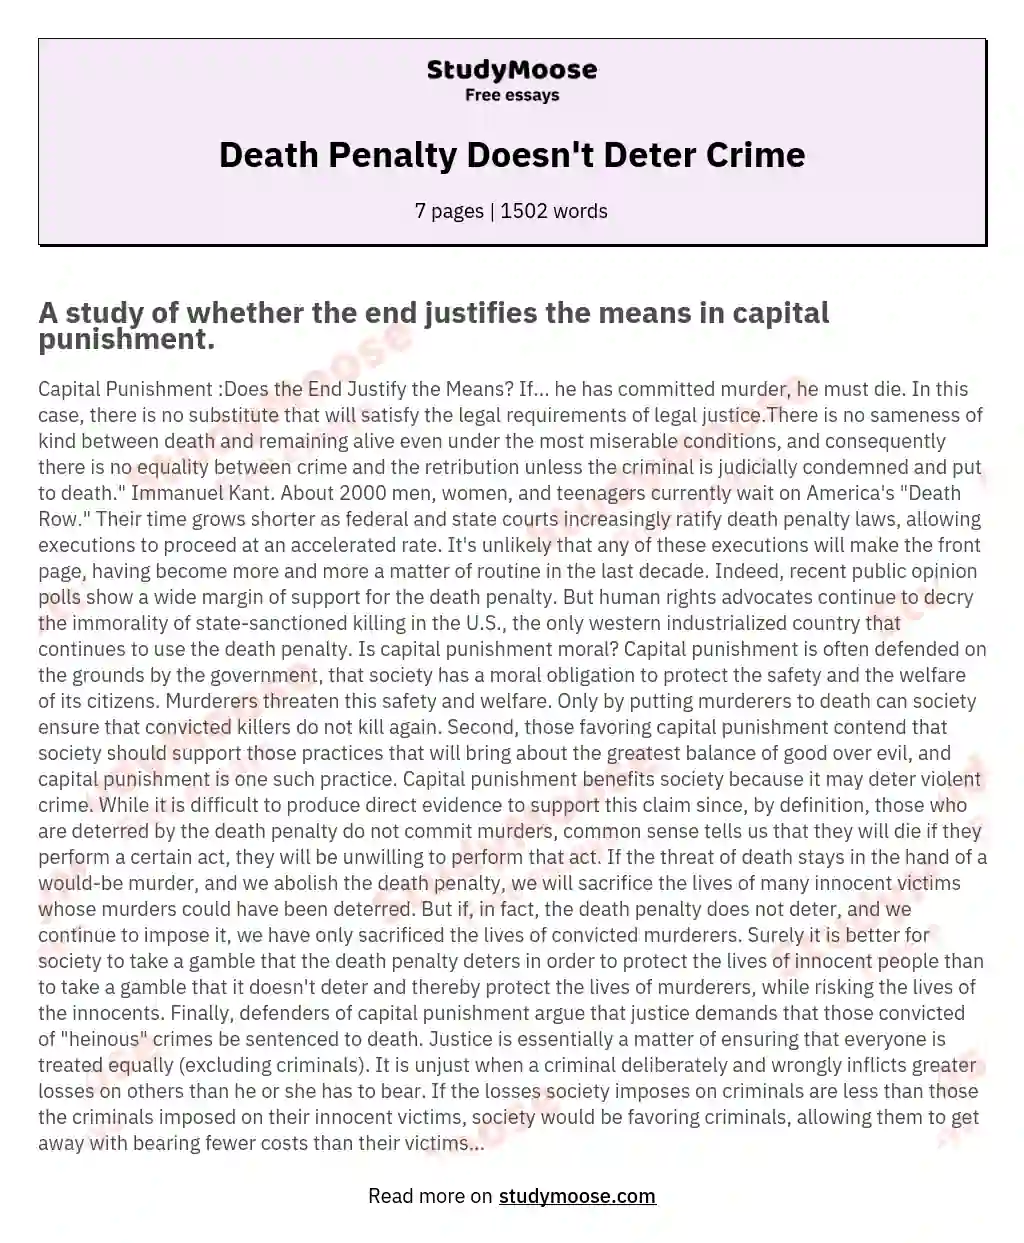 Death Penalty Doesn't Deter Crime essay